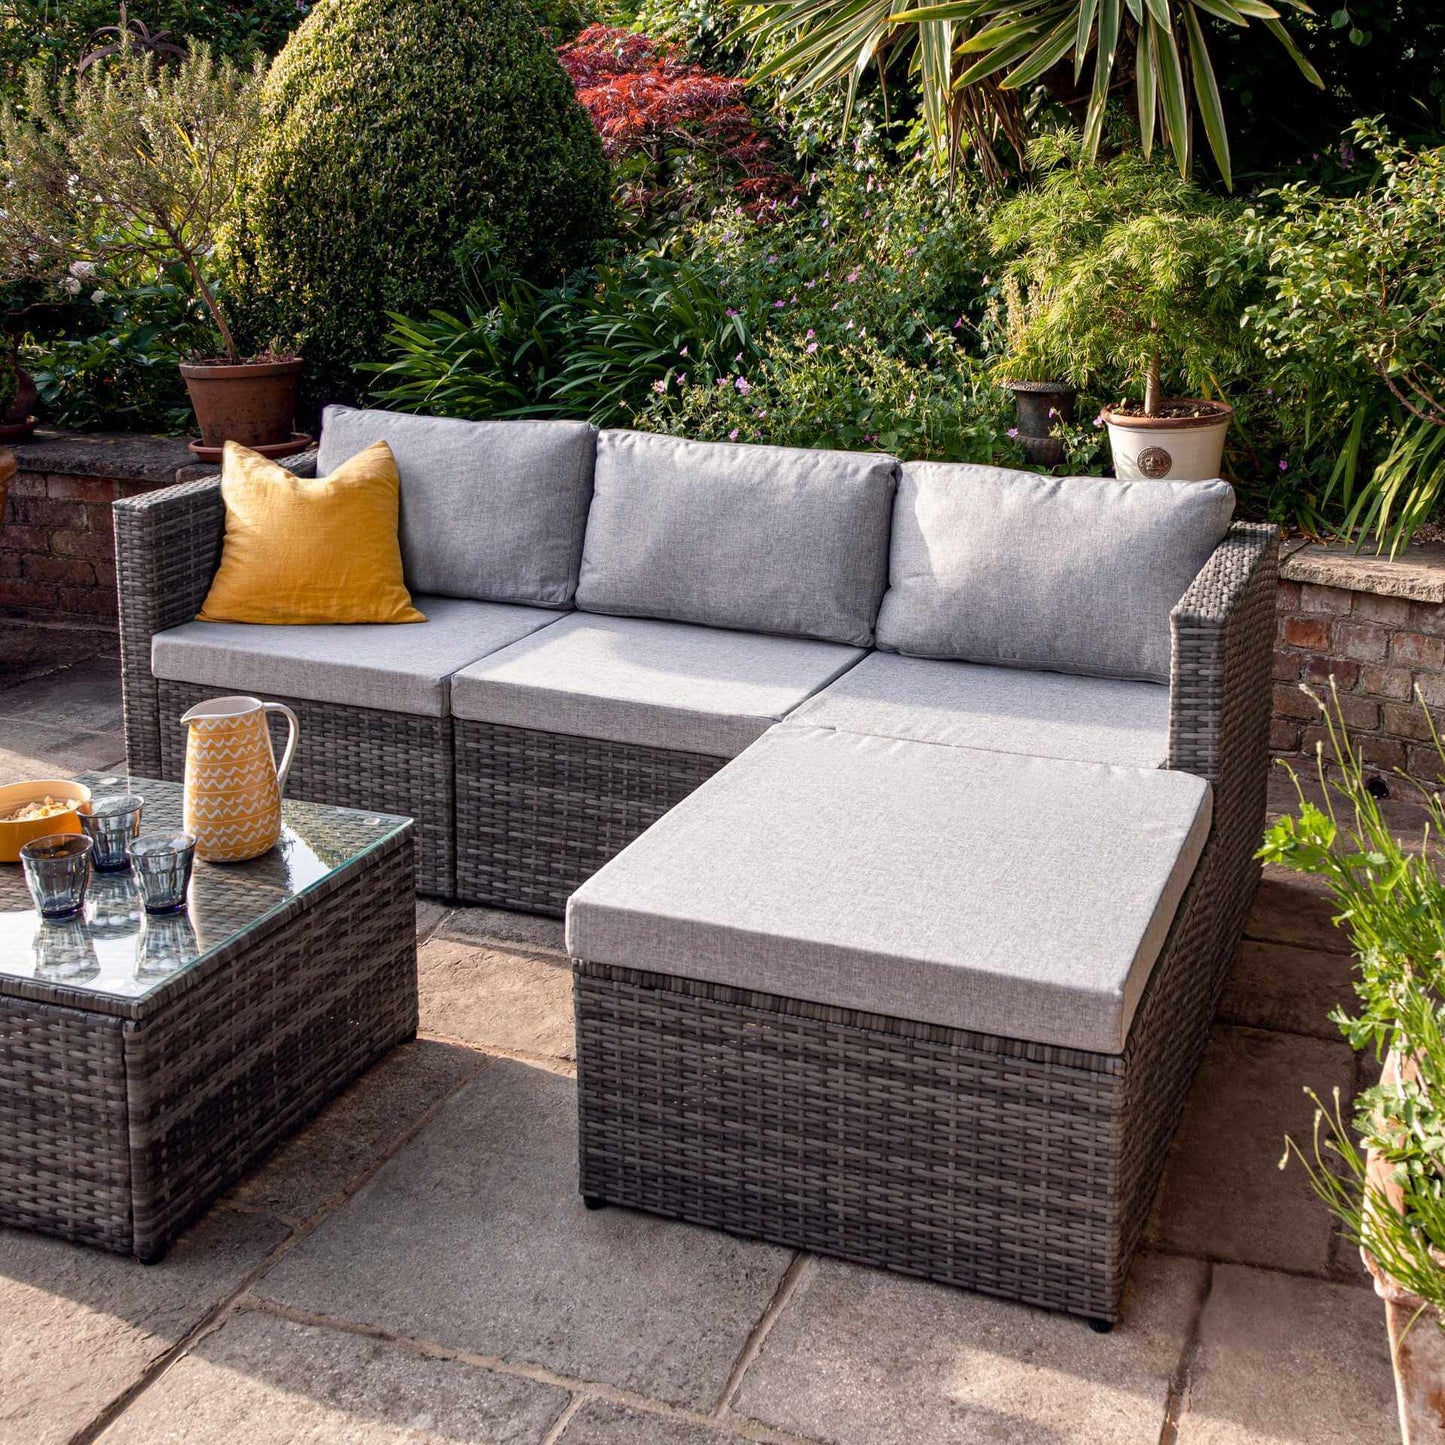 Weston 4 Seater Rattan Corner Sofa Set with LED Cantilever Parasol and Base - Grey Weave